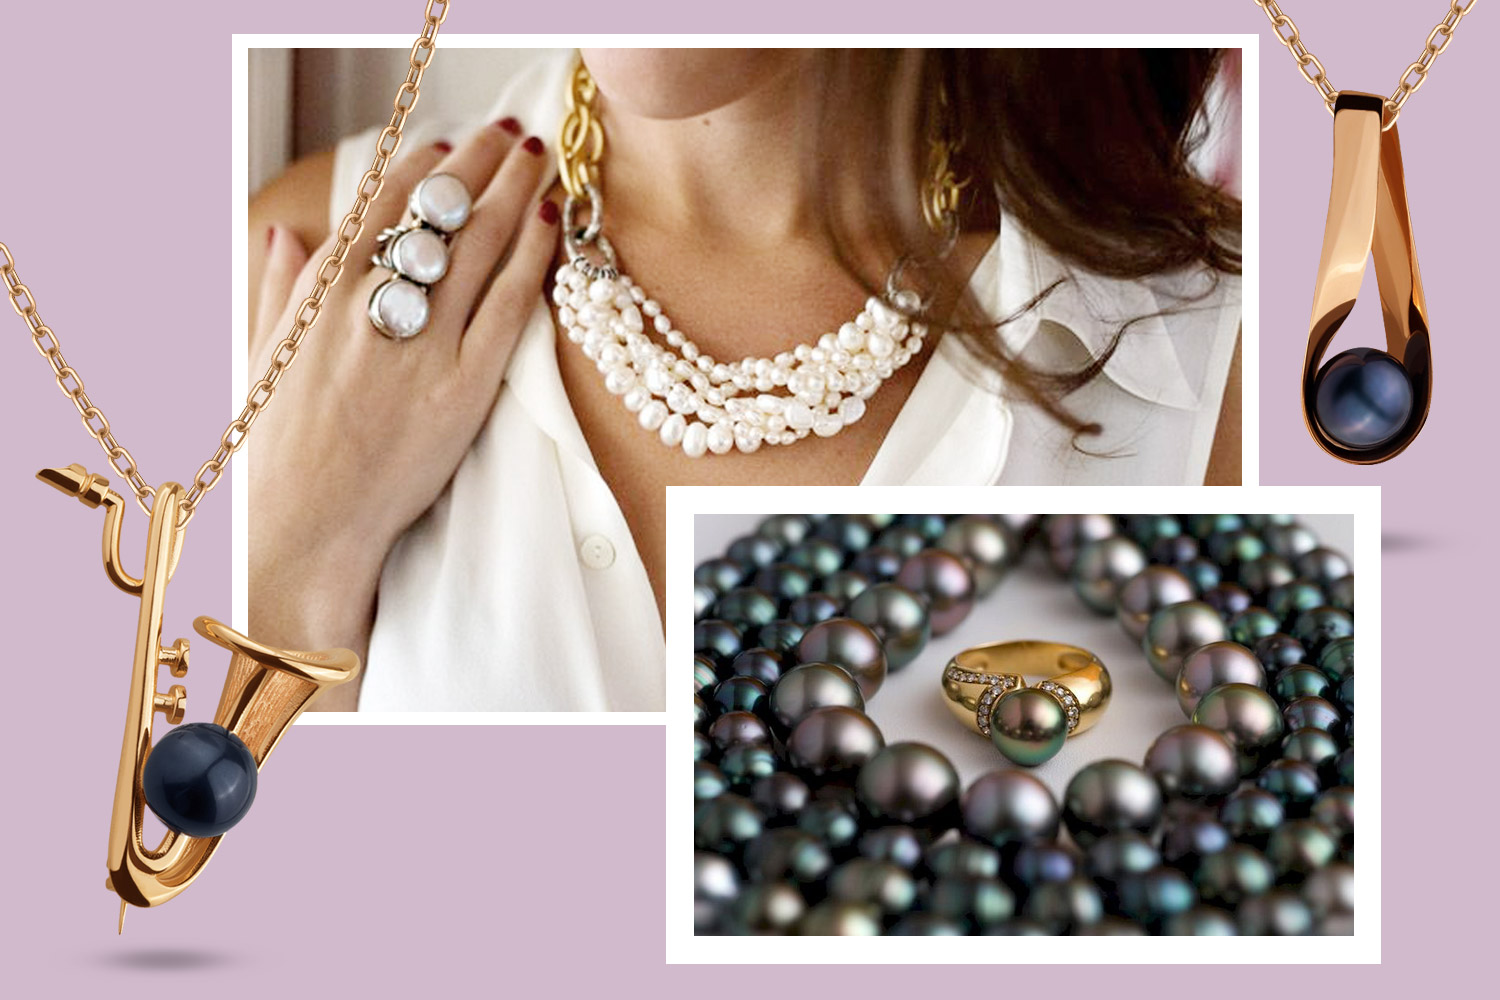 Jewellery with pearls